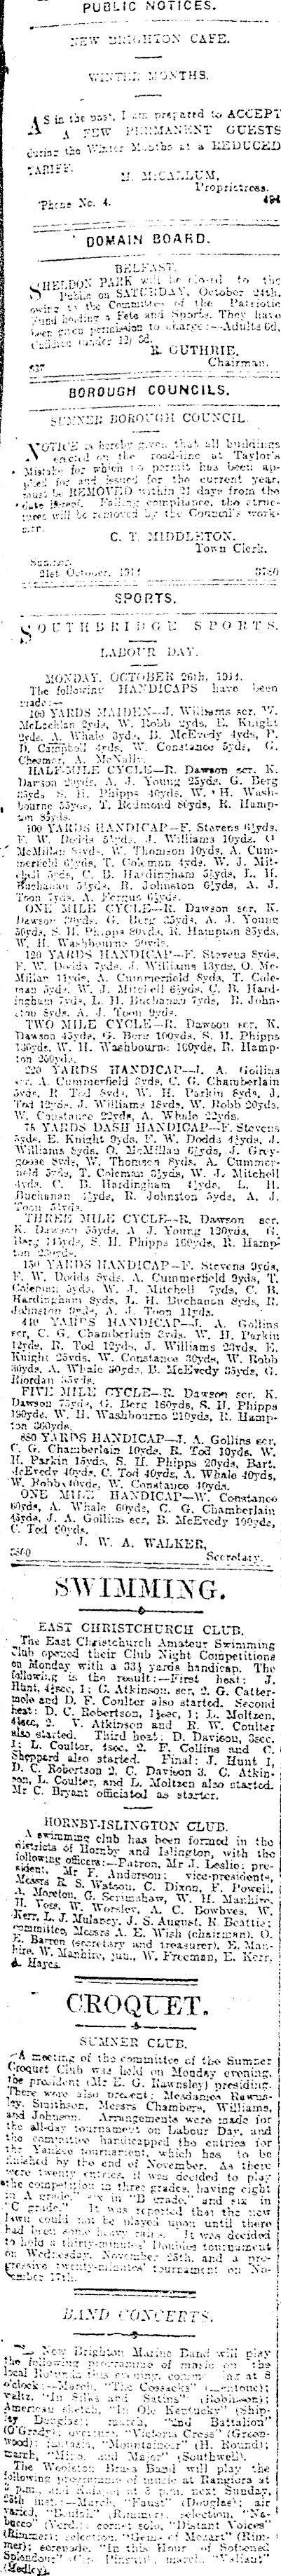 Papers Past Newspapers Press 21 October 1914 Page 9 Advertisements Column 1